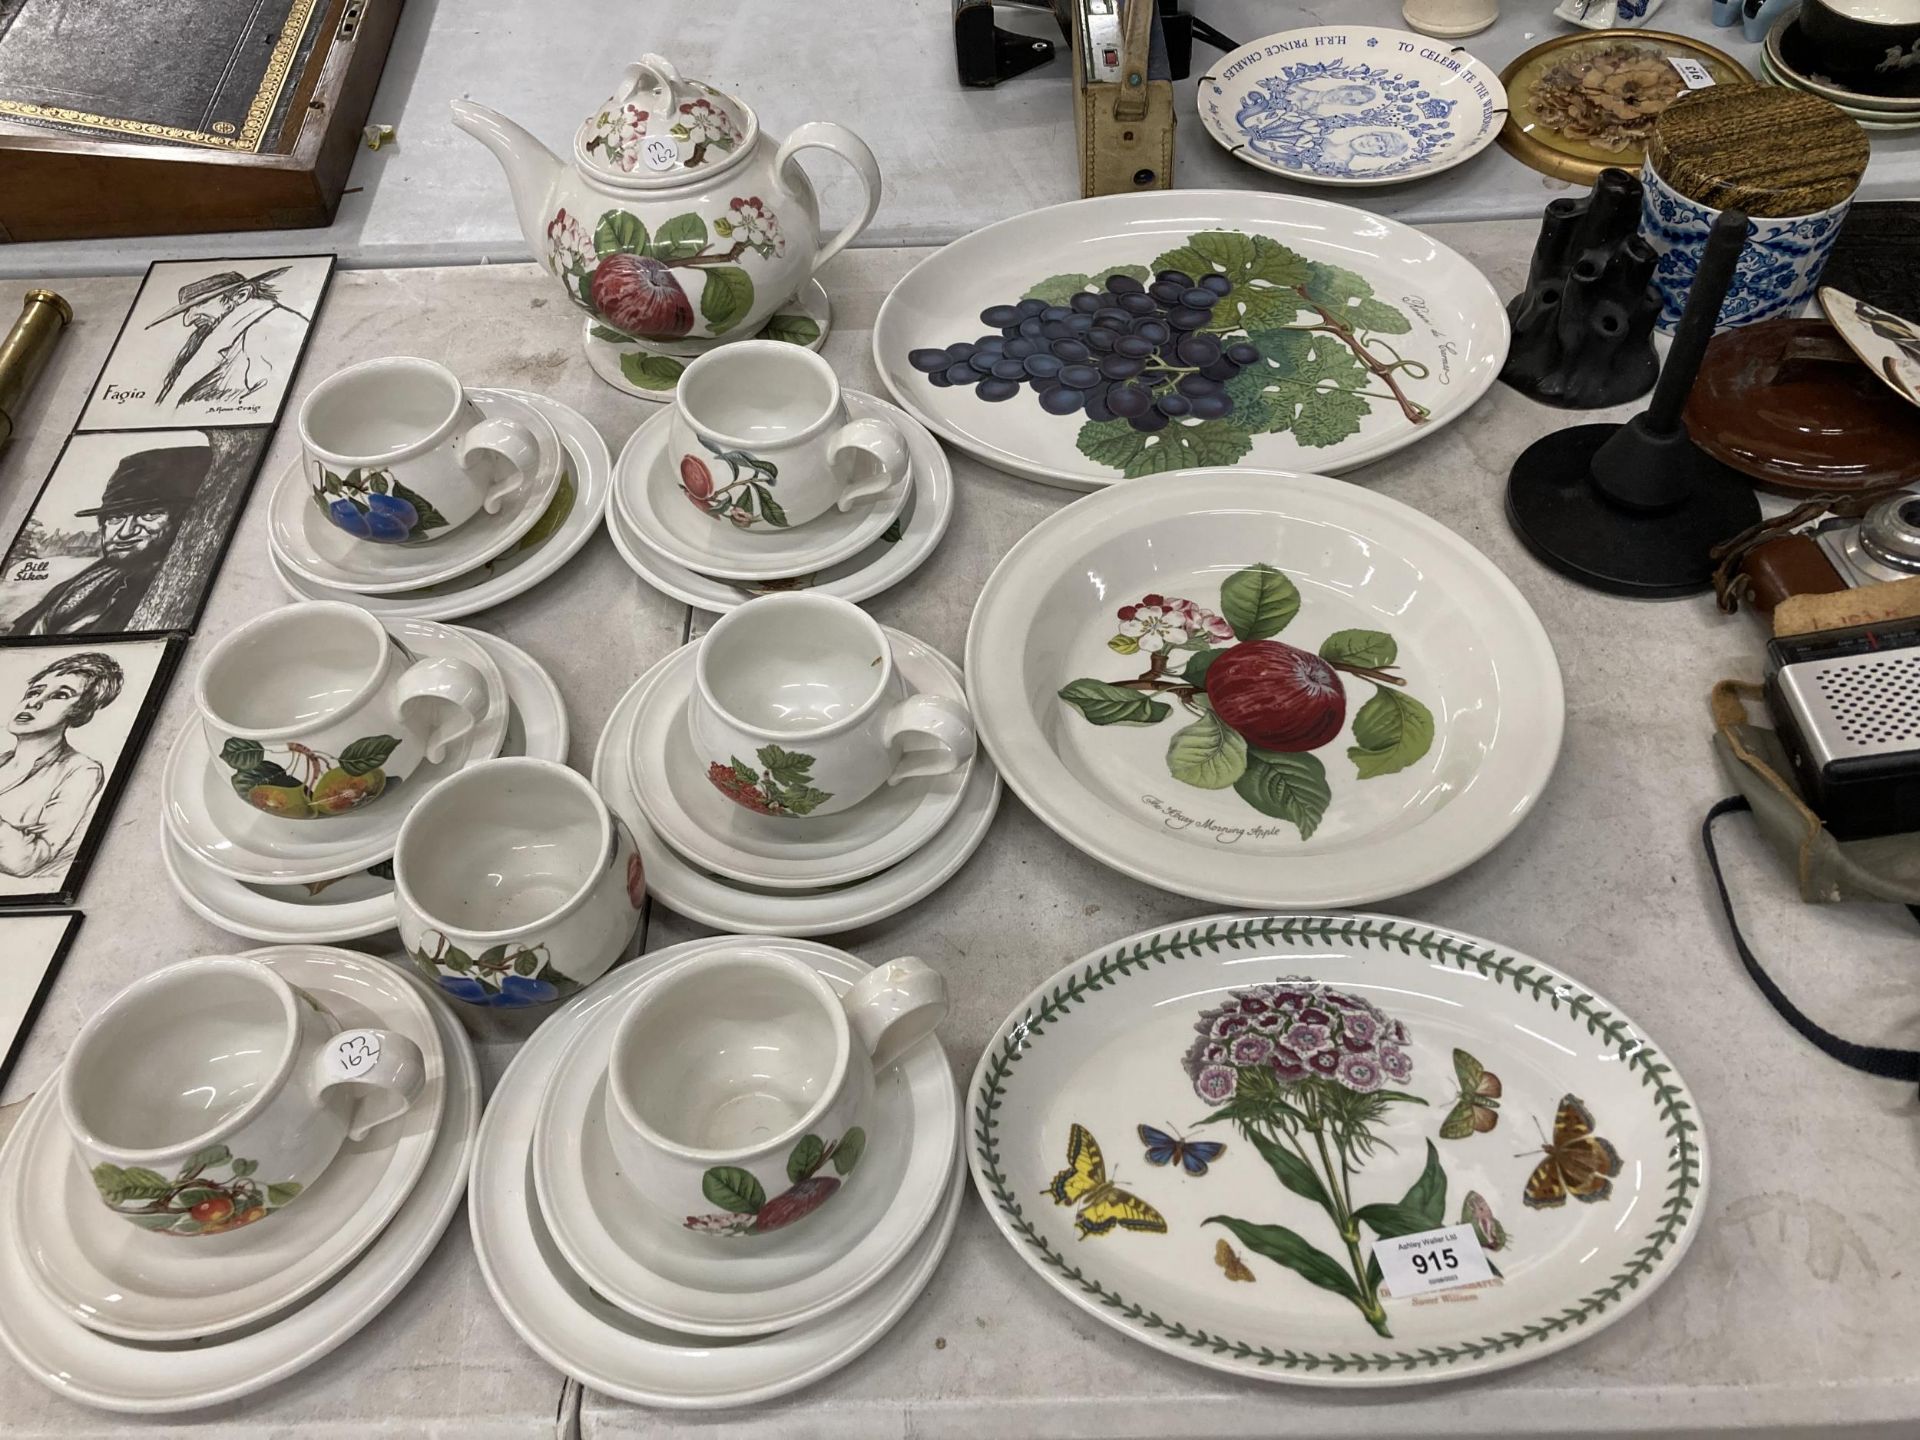 A PORTMEIRION POTTERY TEASET WITH FURTHER SERVING DISHES